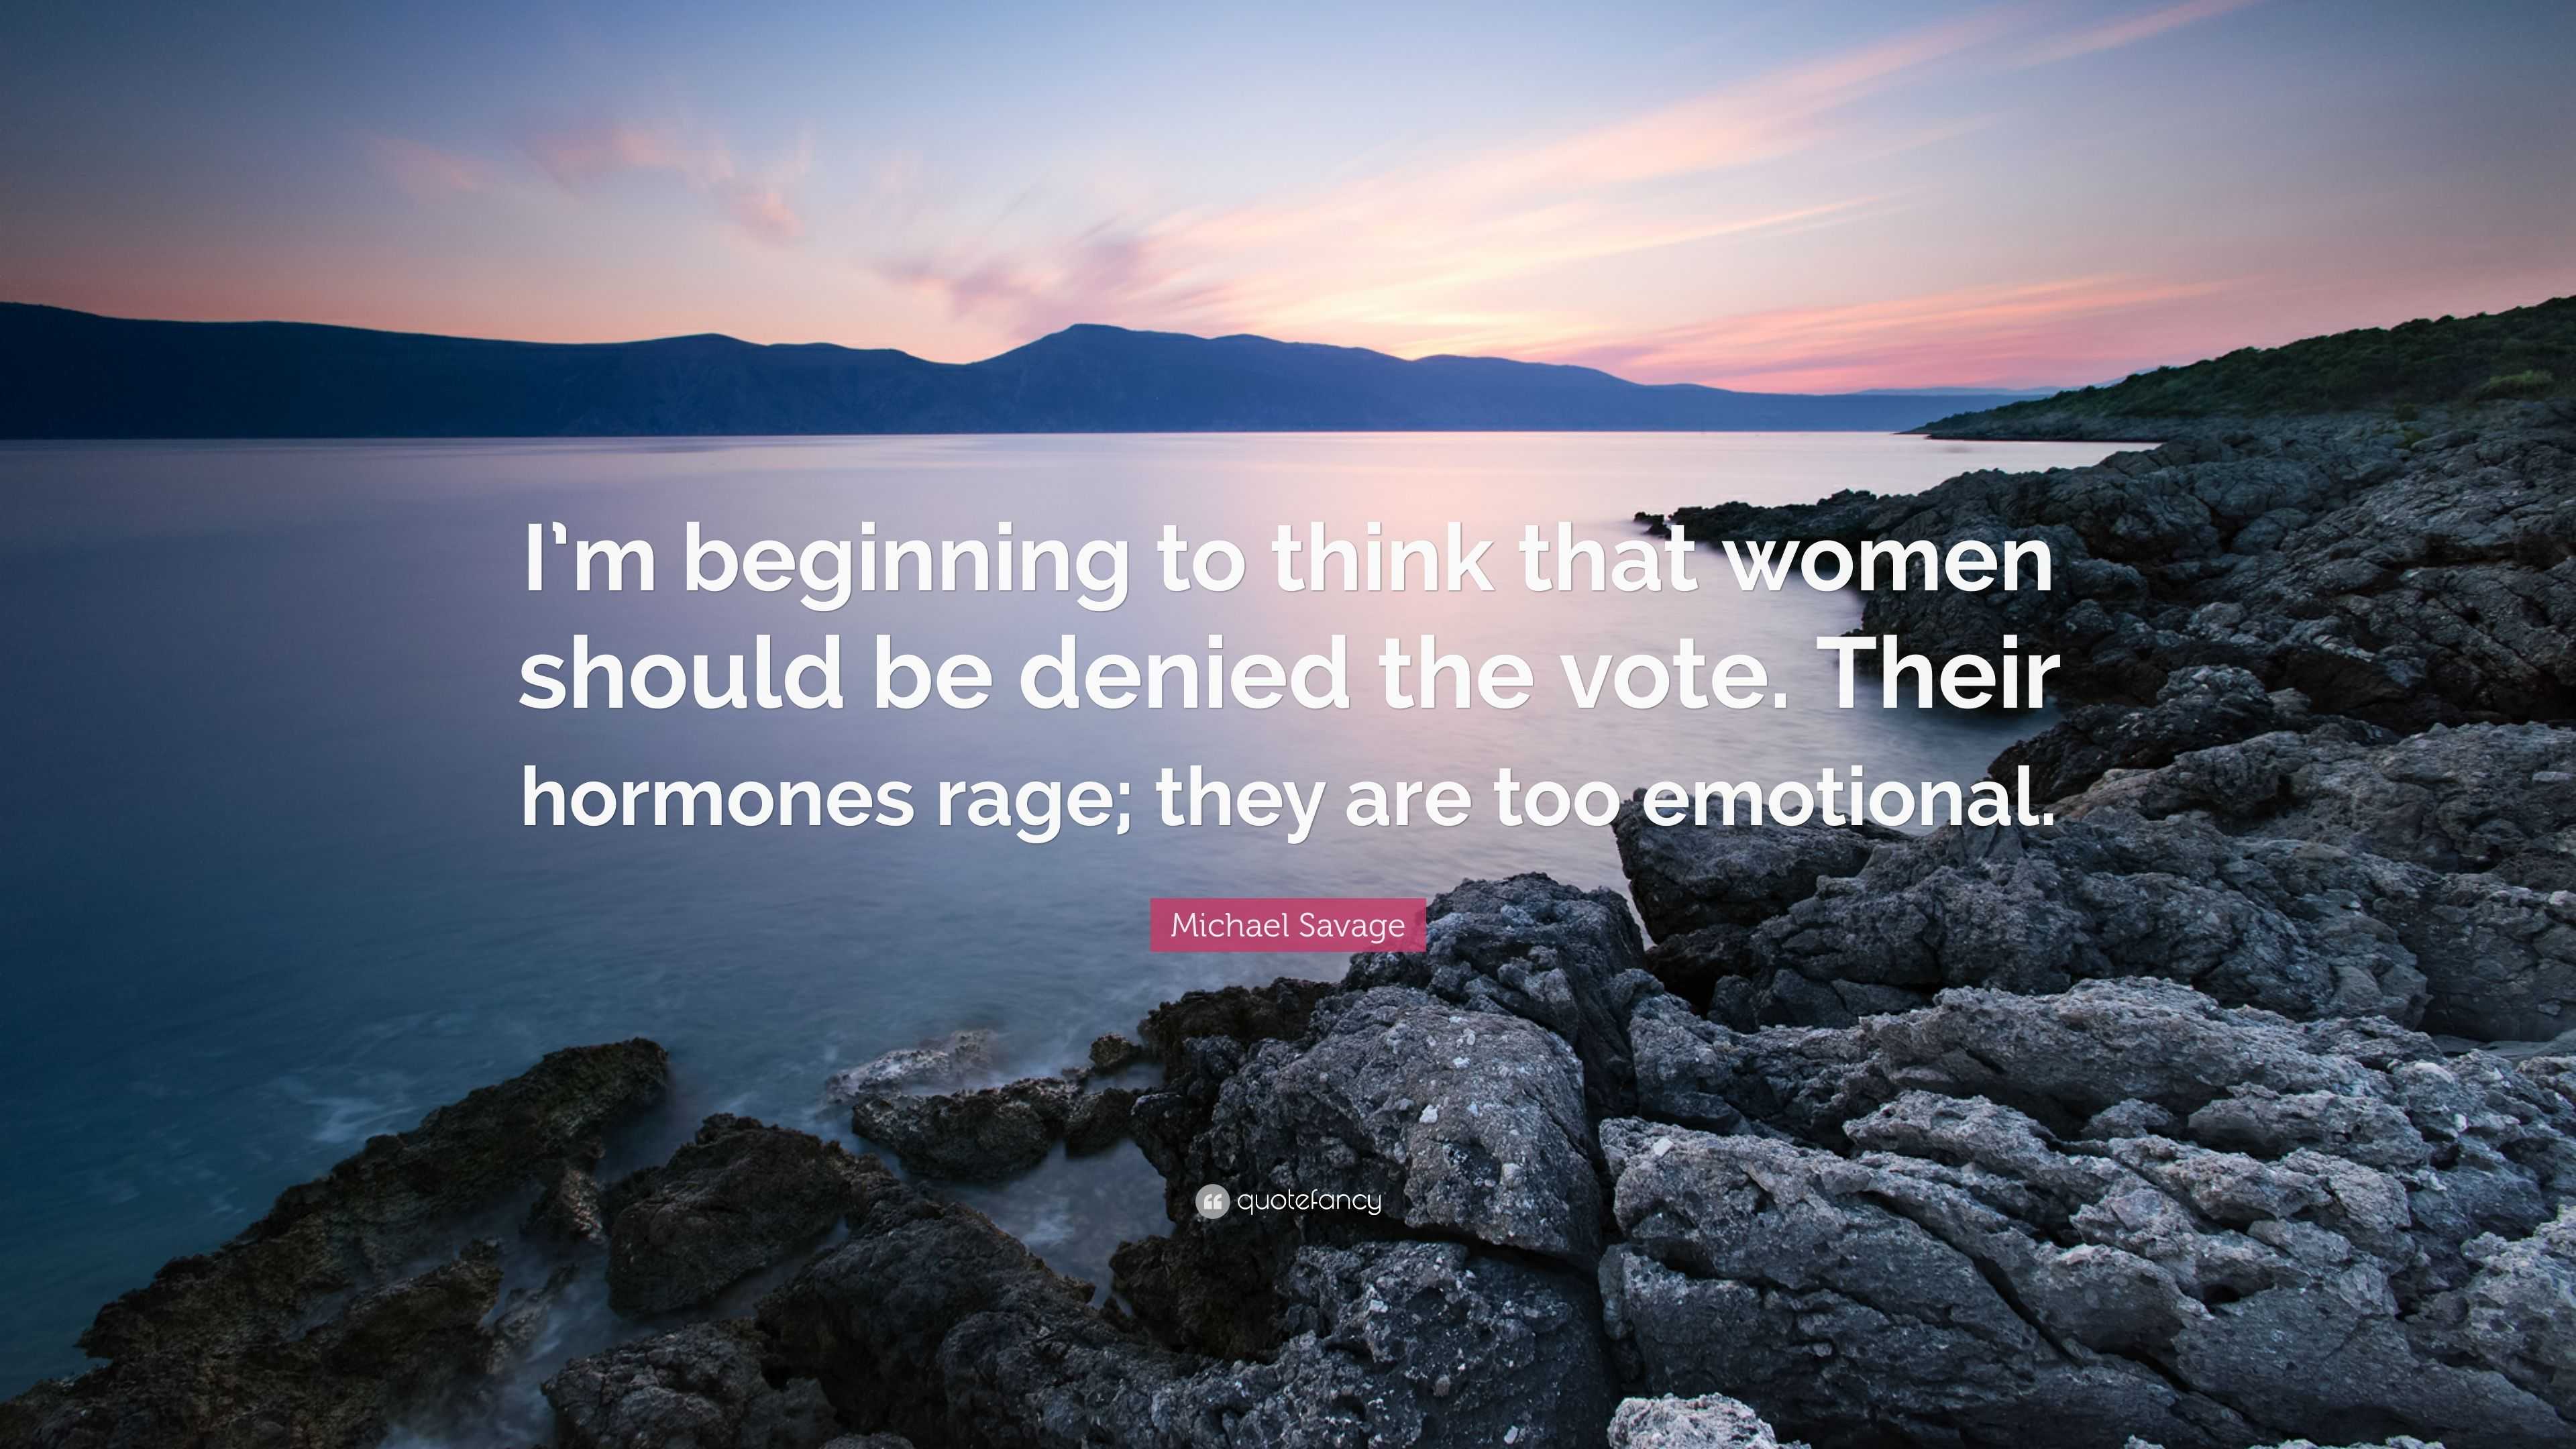 Michael Savage Quote: “I’m beginning to think that women should be